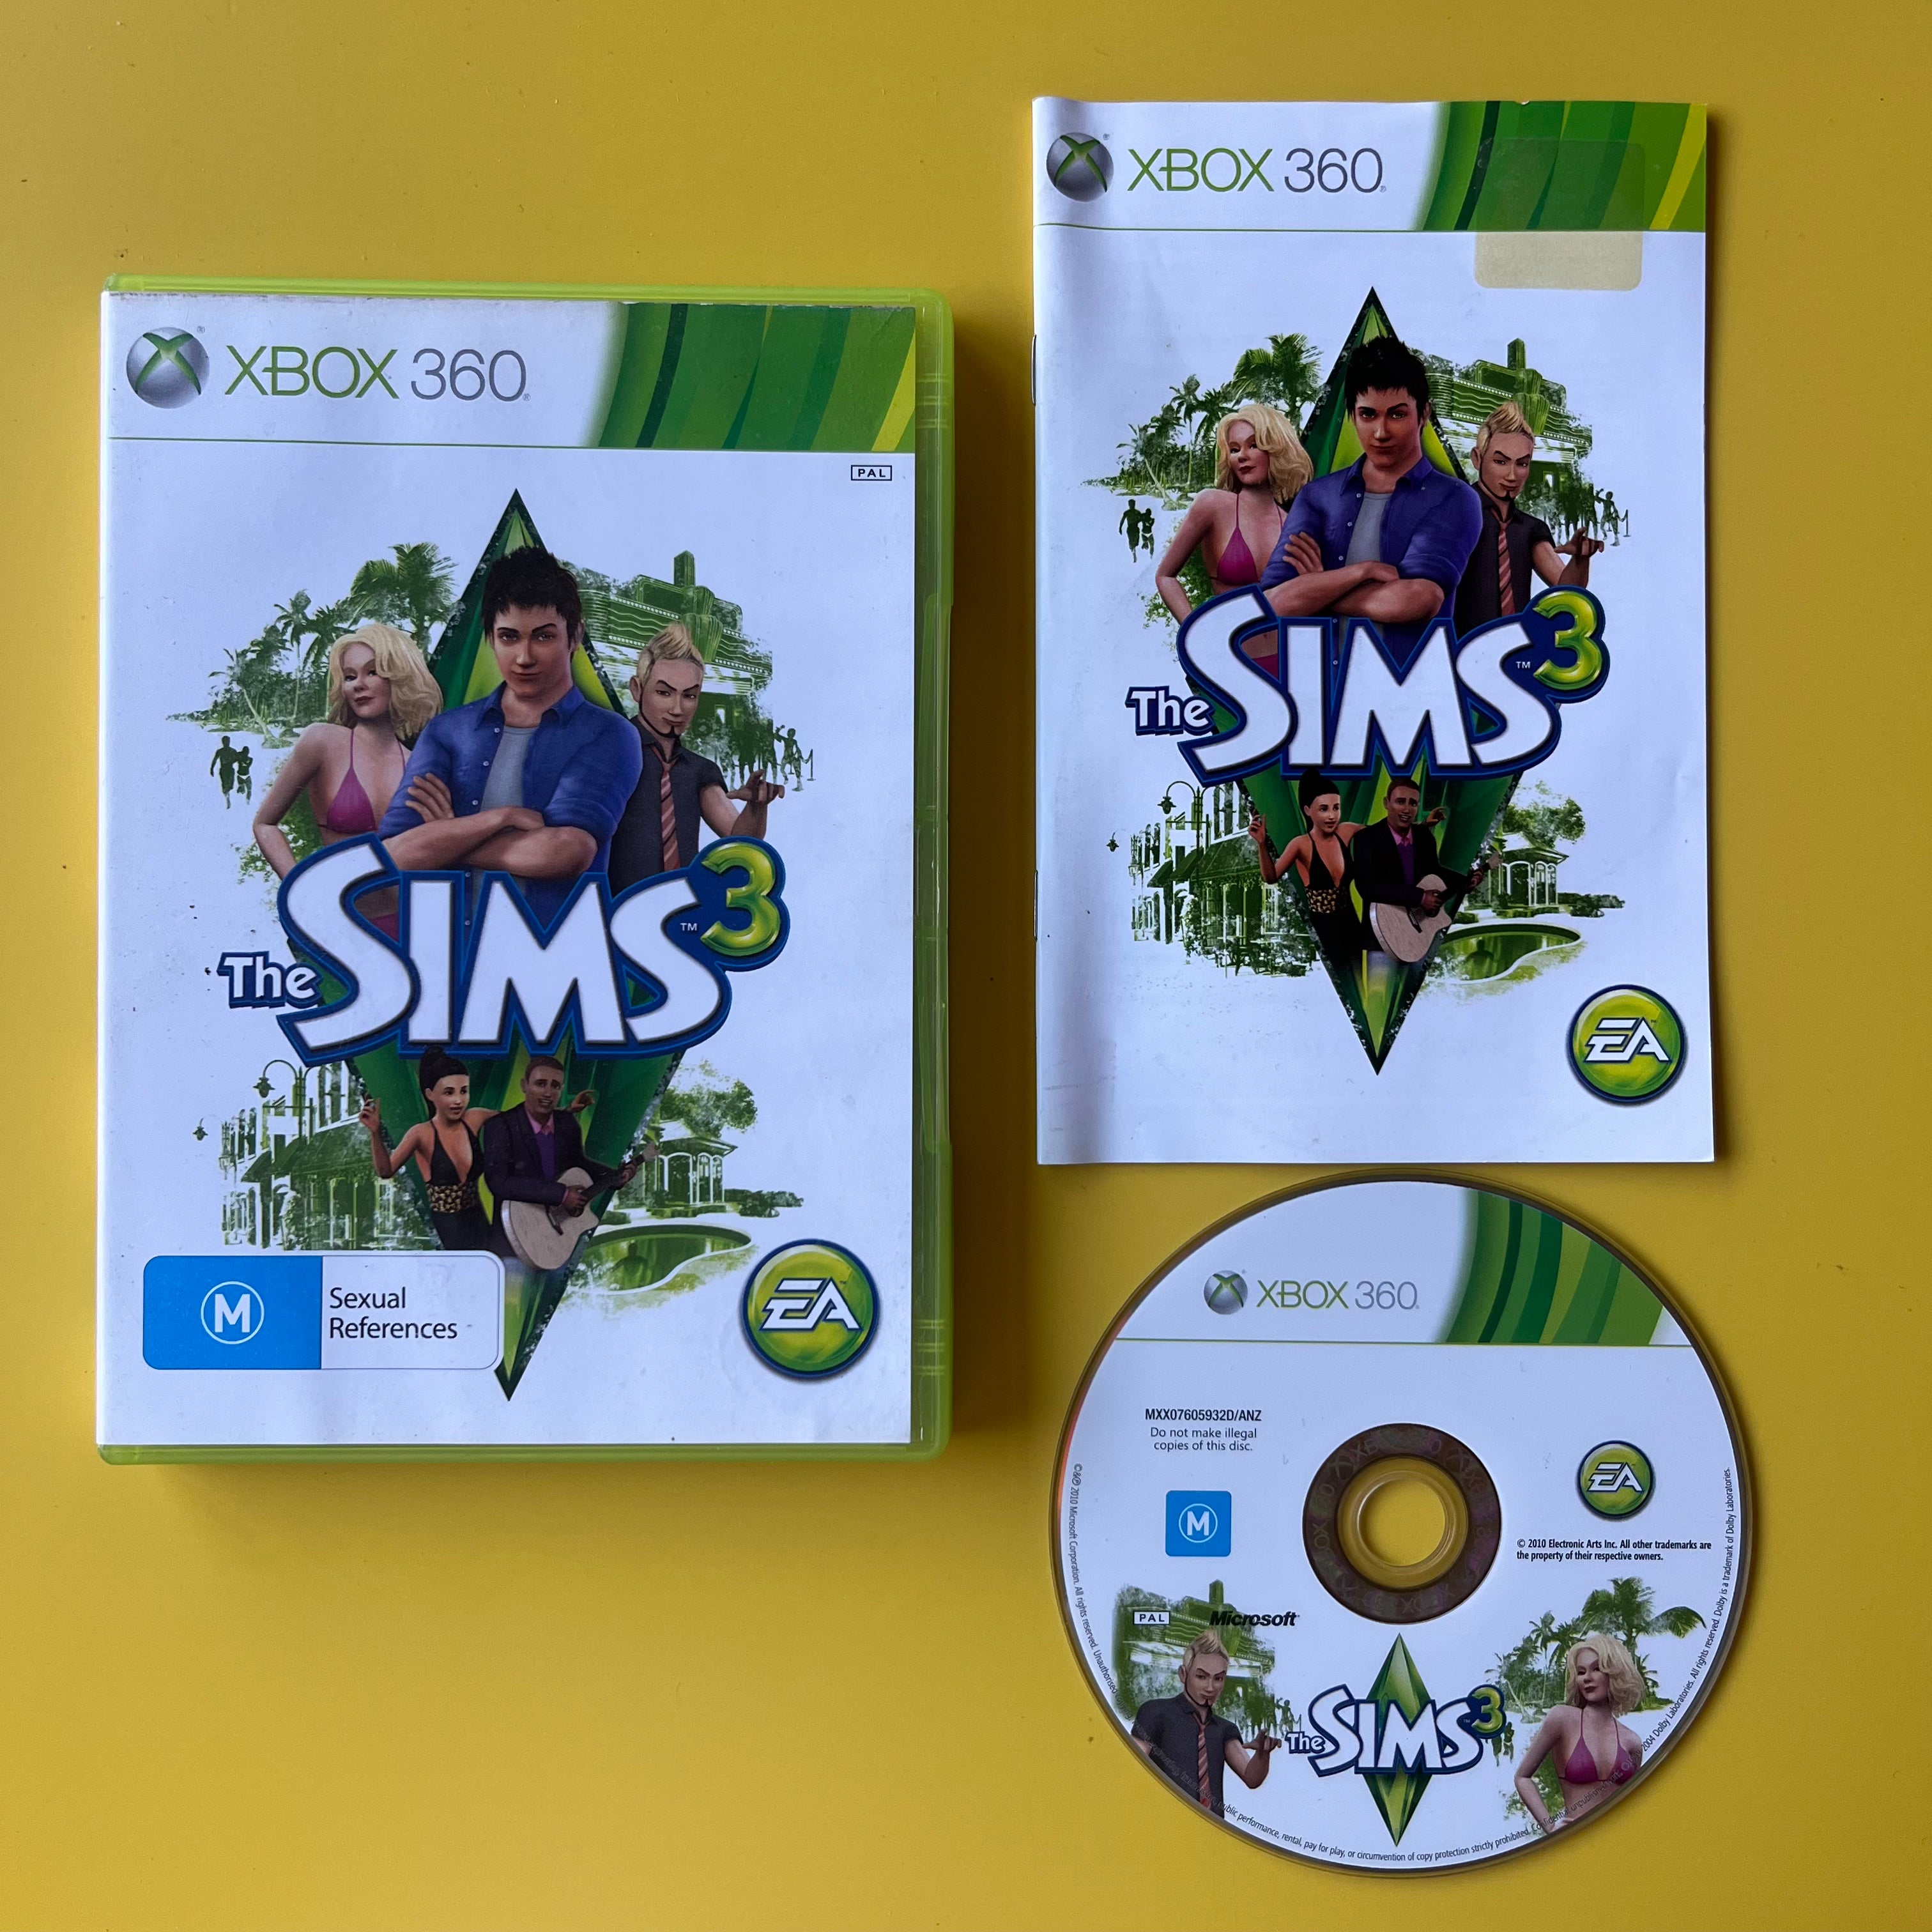 Xbox 360 - The Sims 3